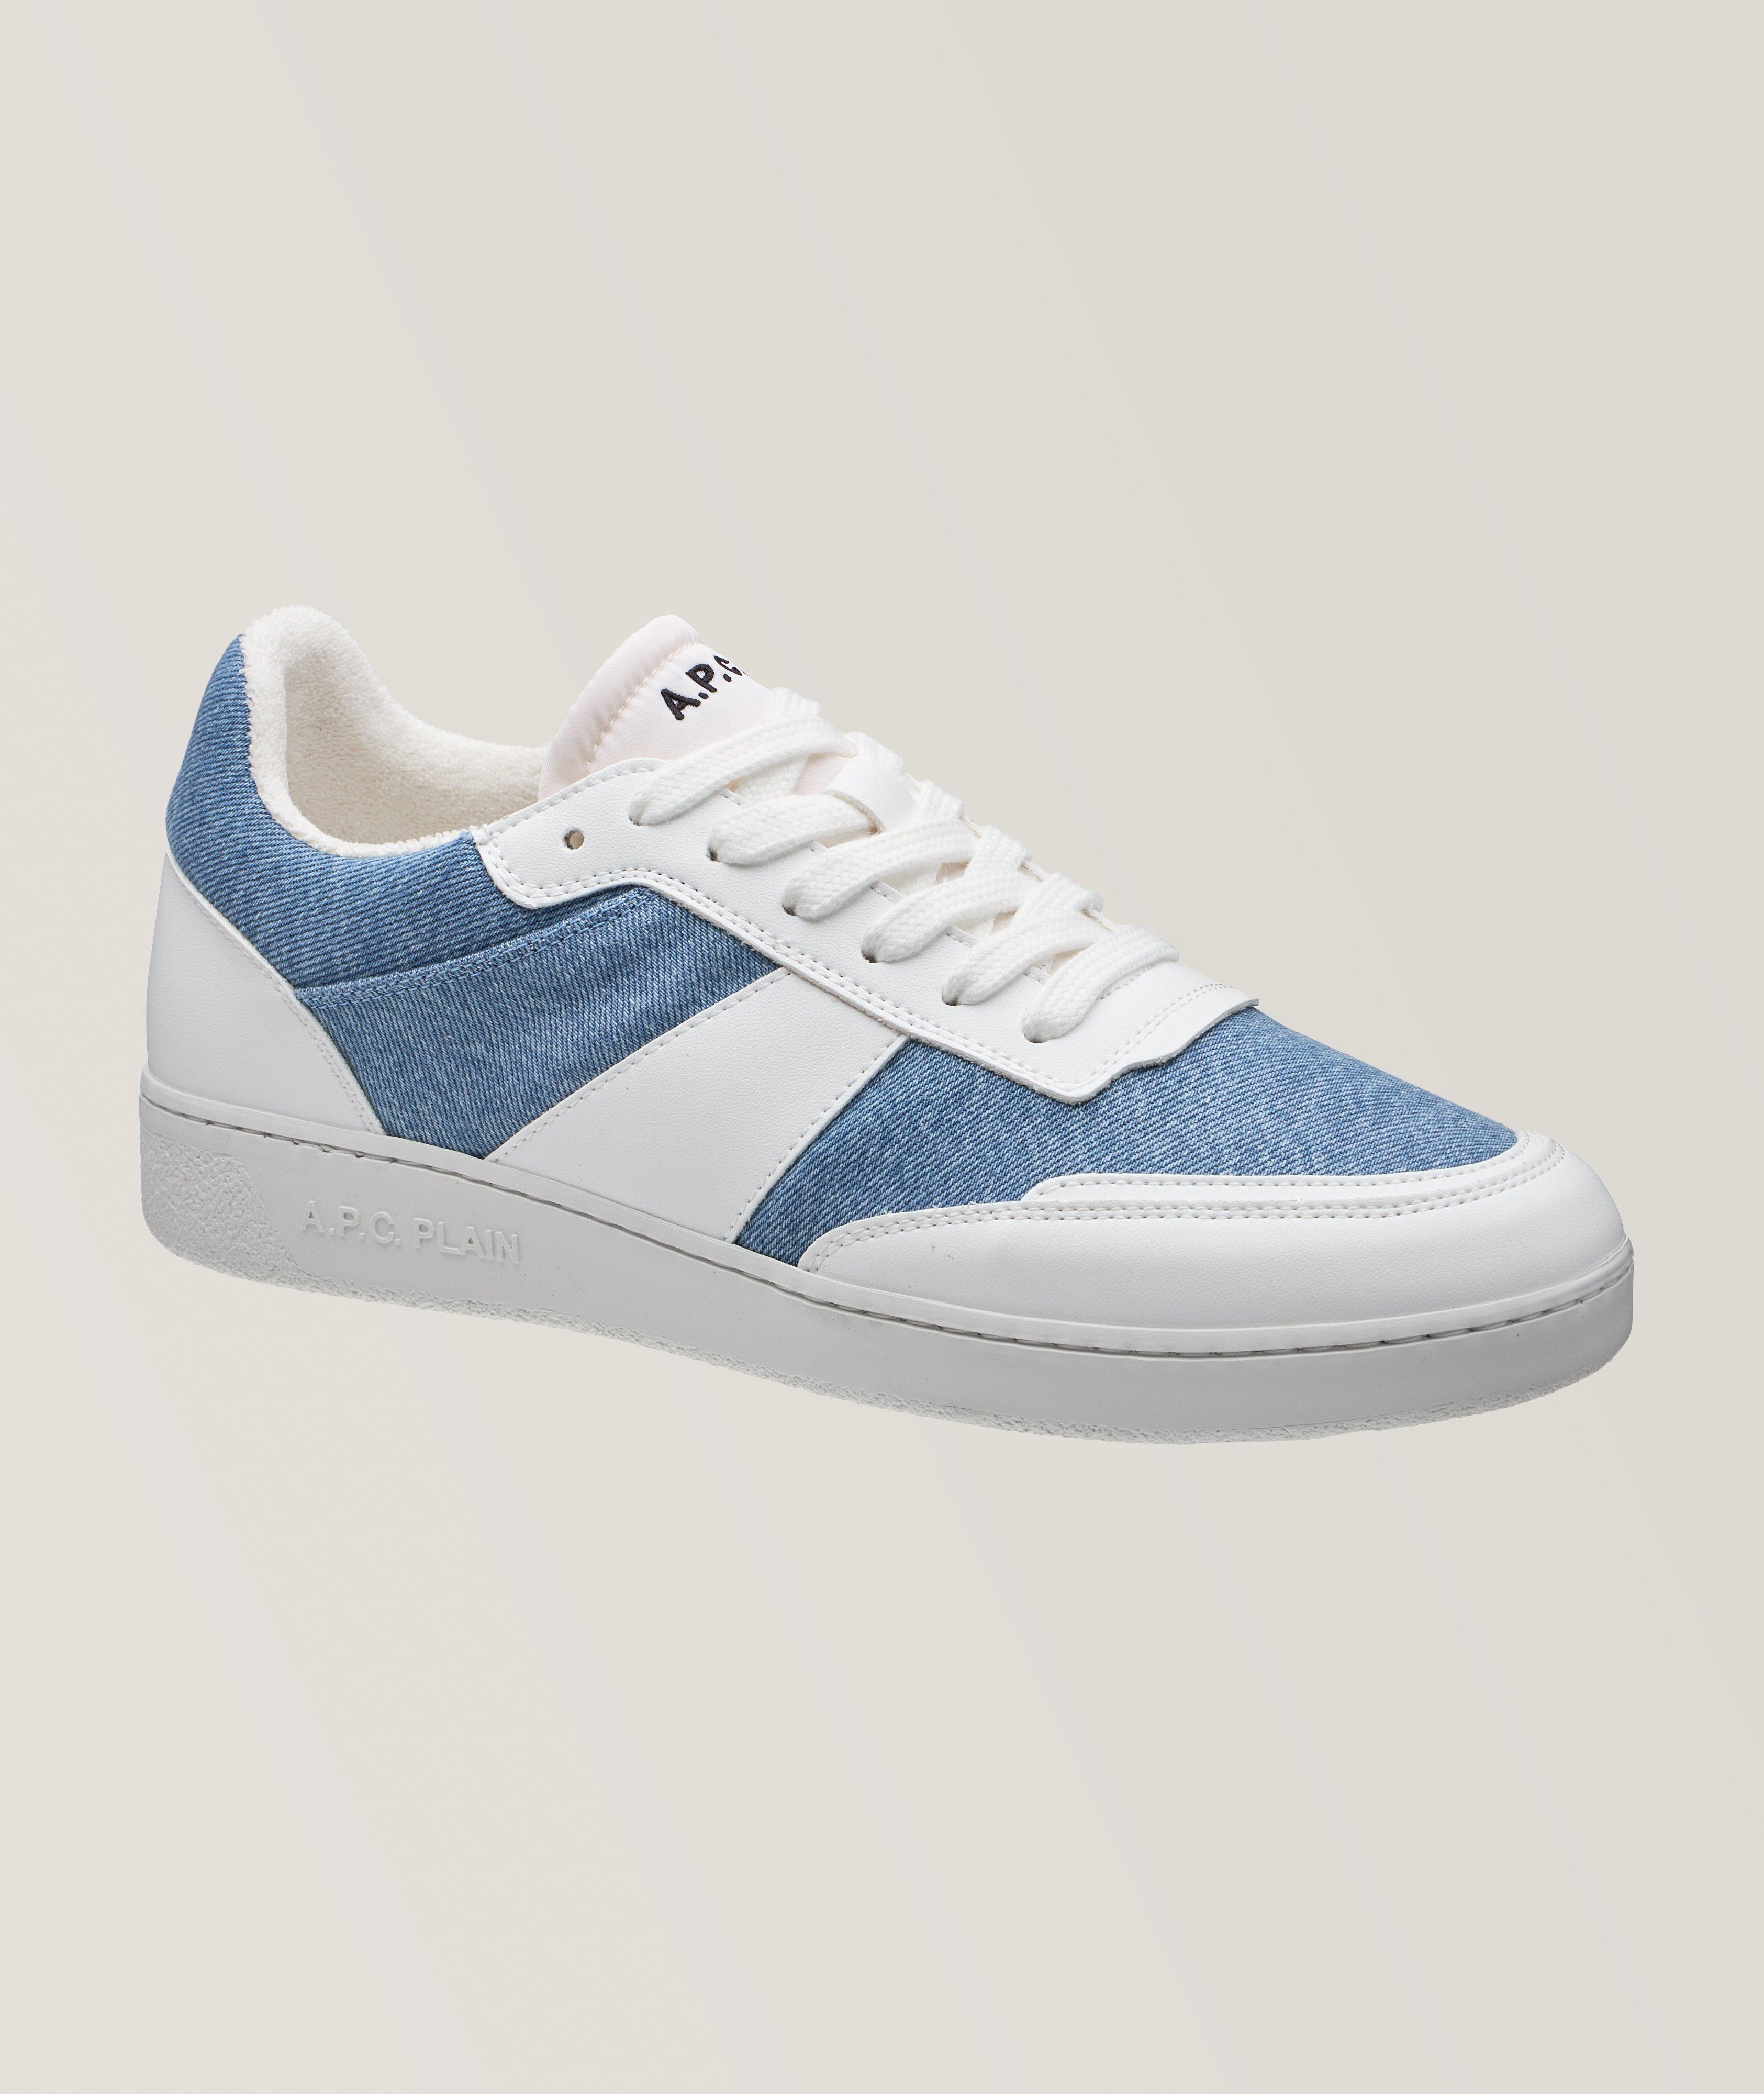 Split Panels Canvas & Leather Sneakers image 0